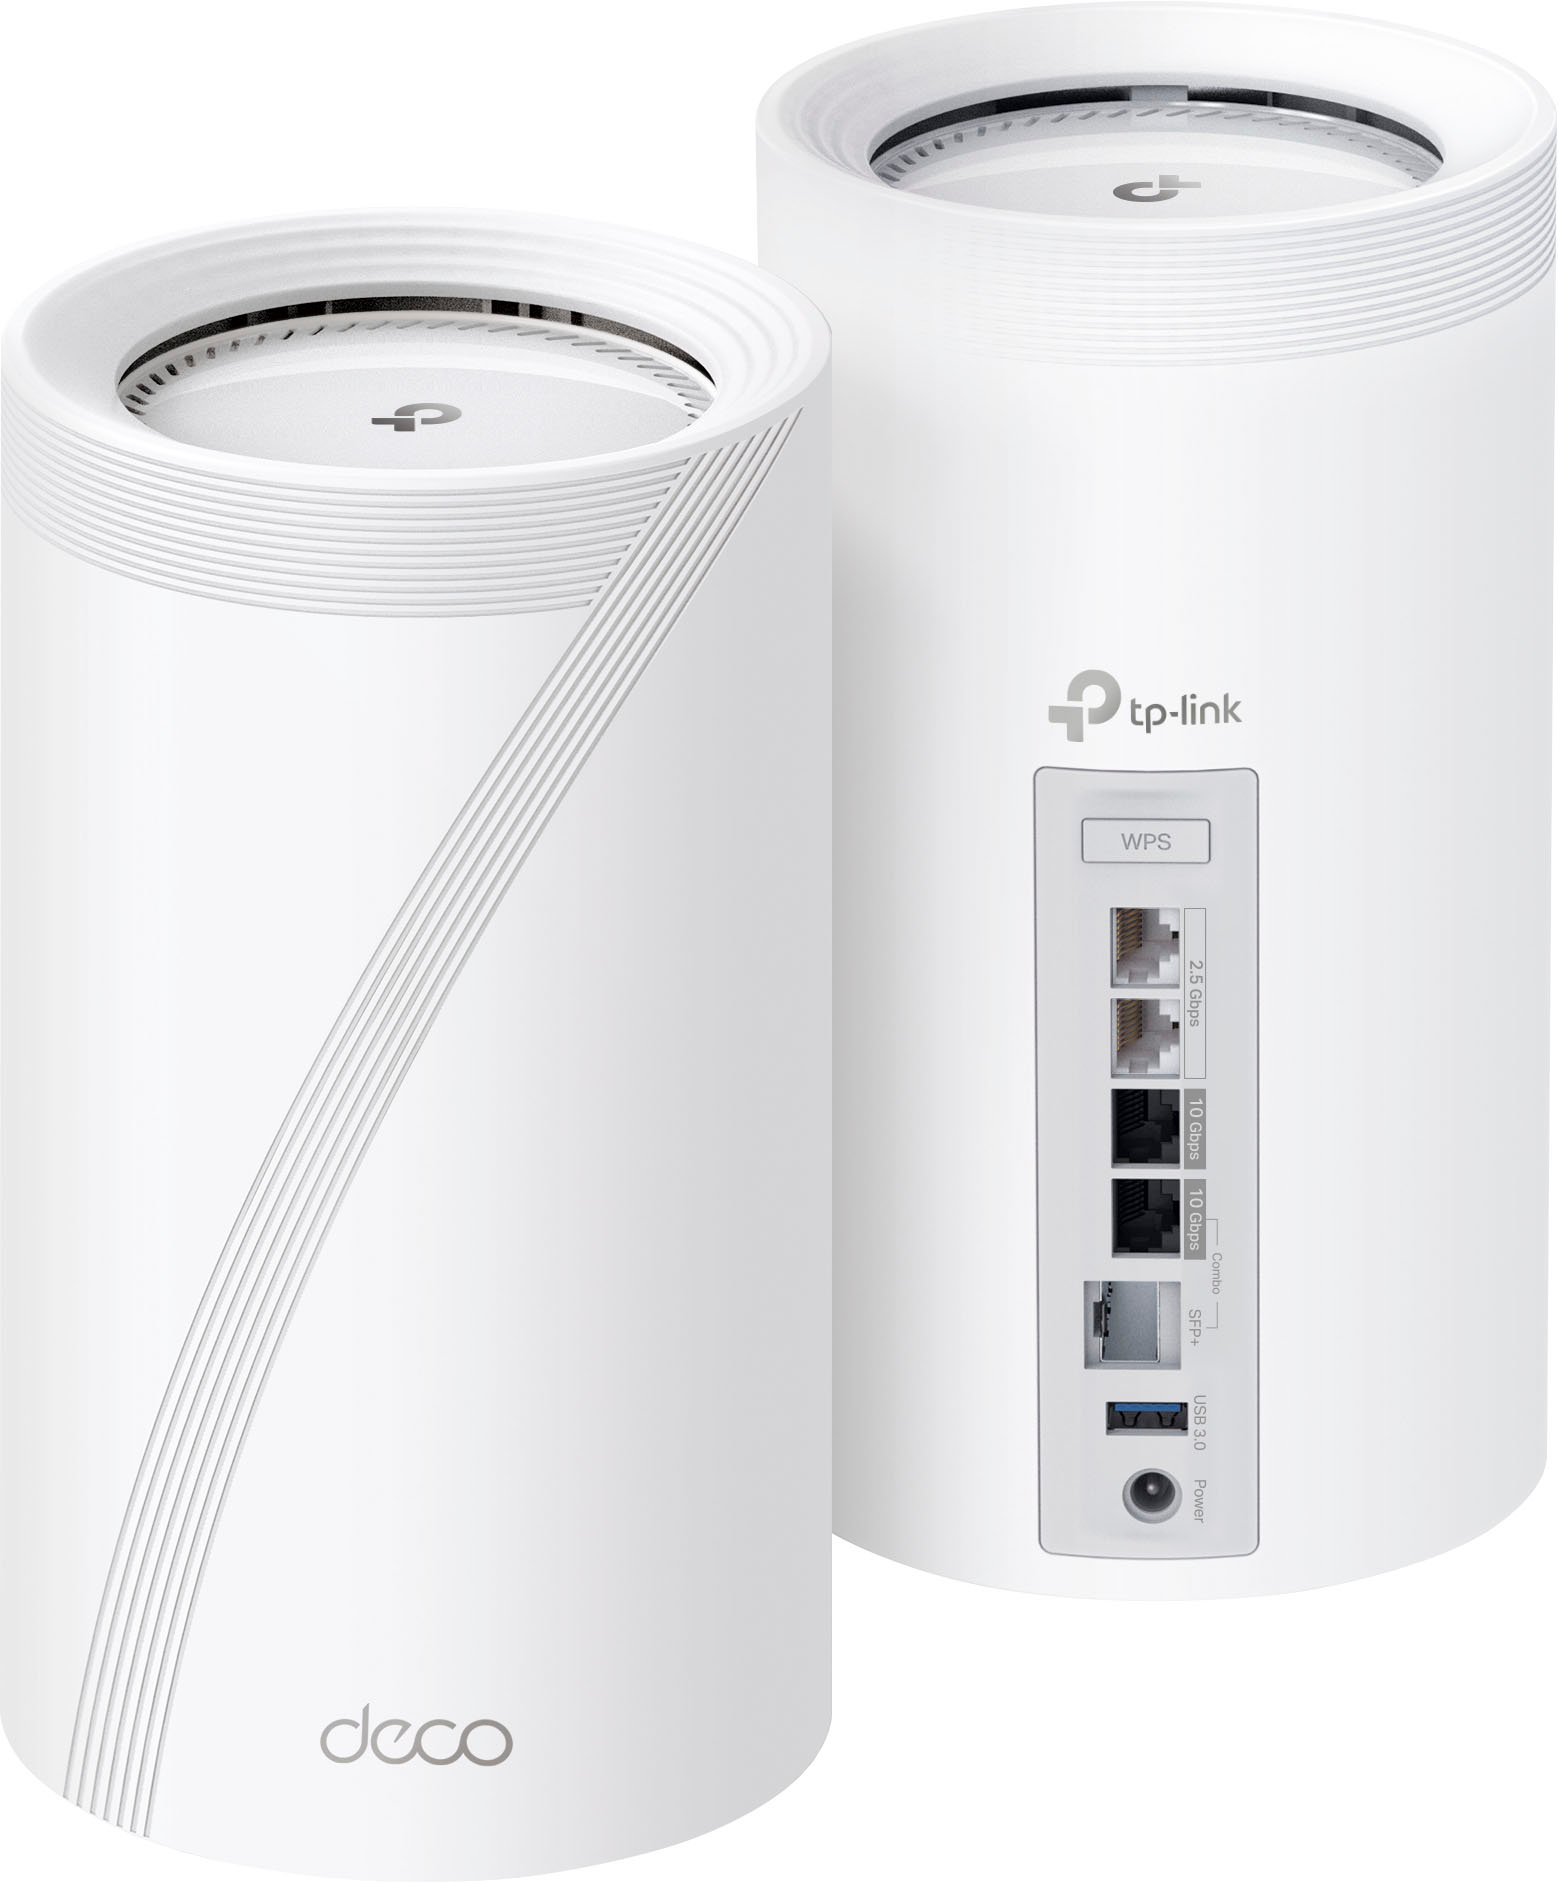 TP-Link Deco XE75 (2-pack) Wireless Router Review - Consumer Reports